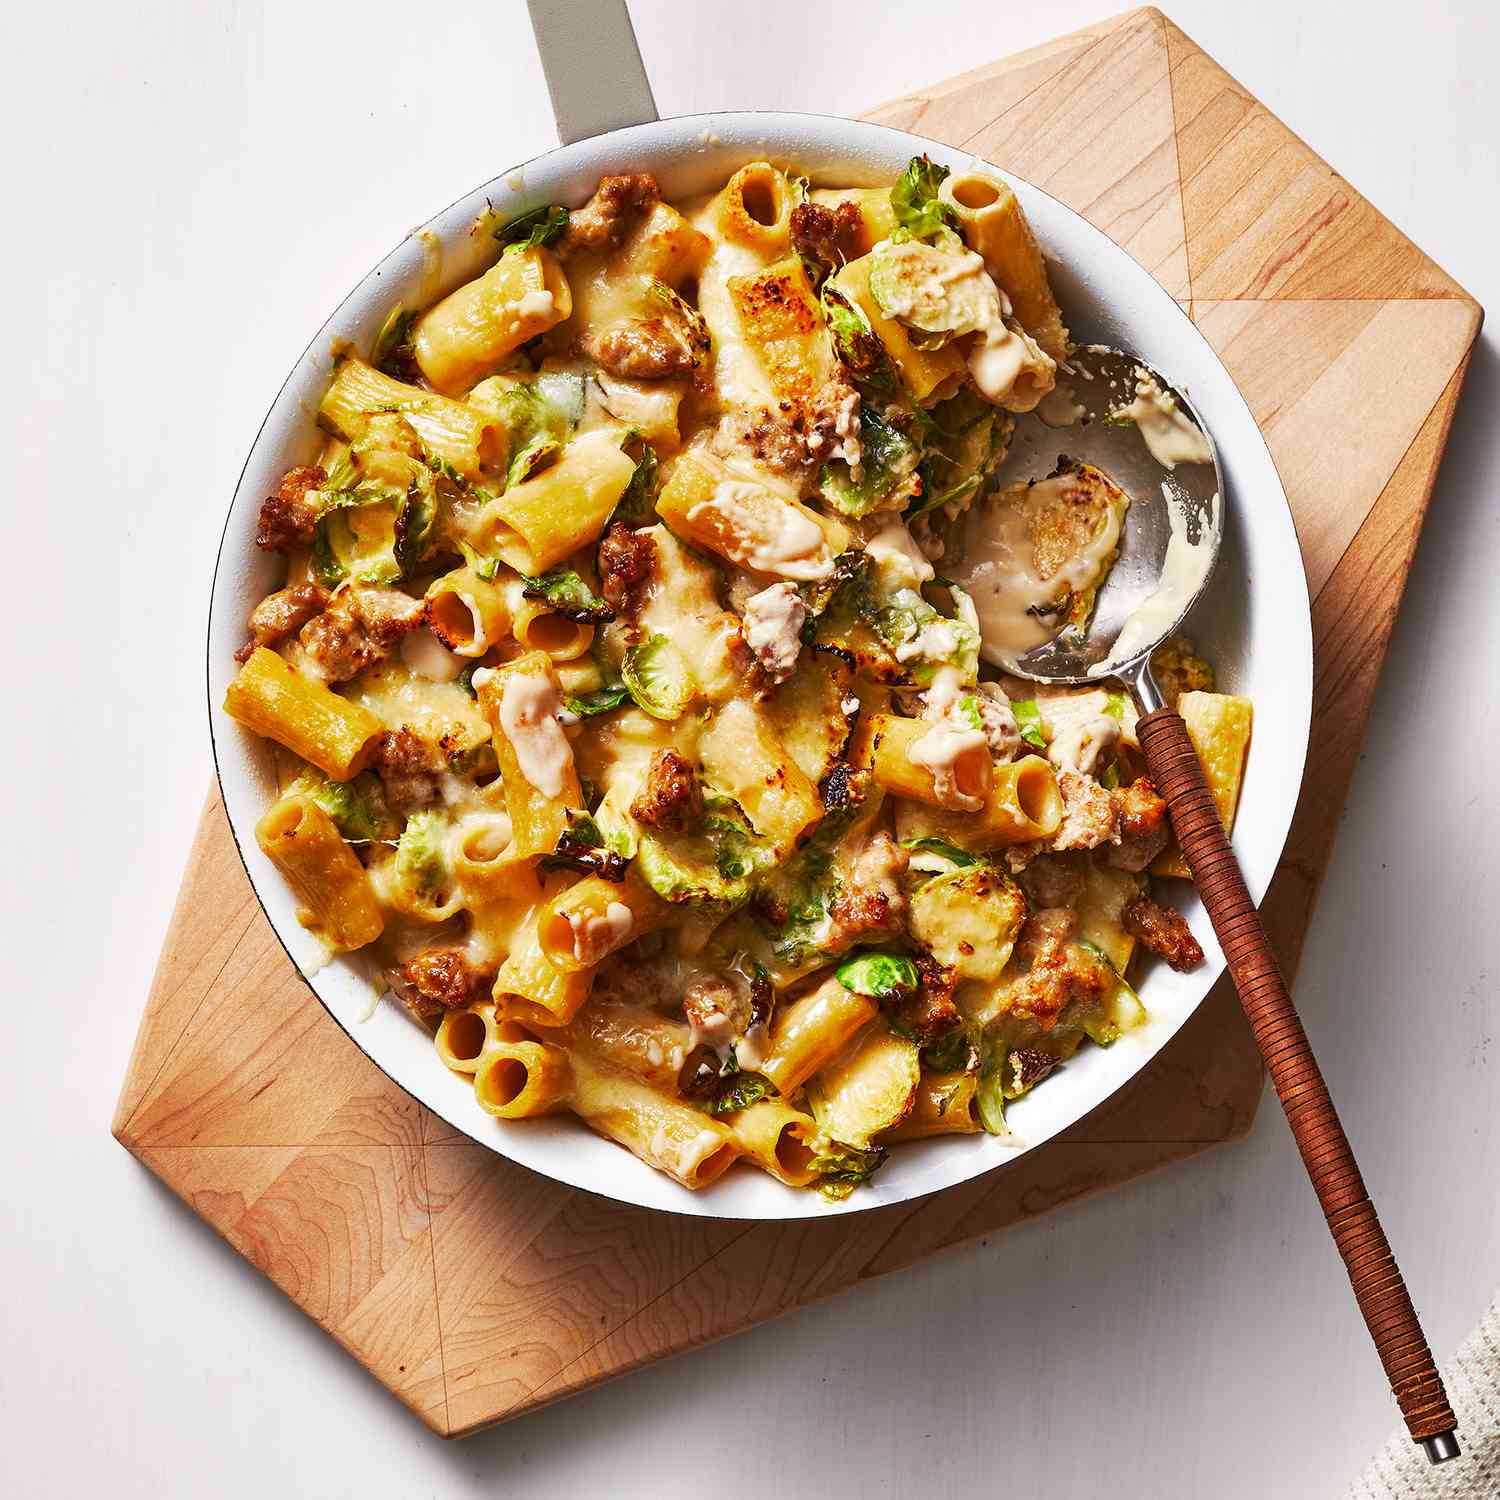 Cheesy Pasta With Sausage and Brussels Sprouts 